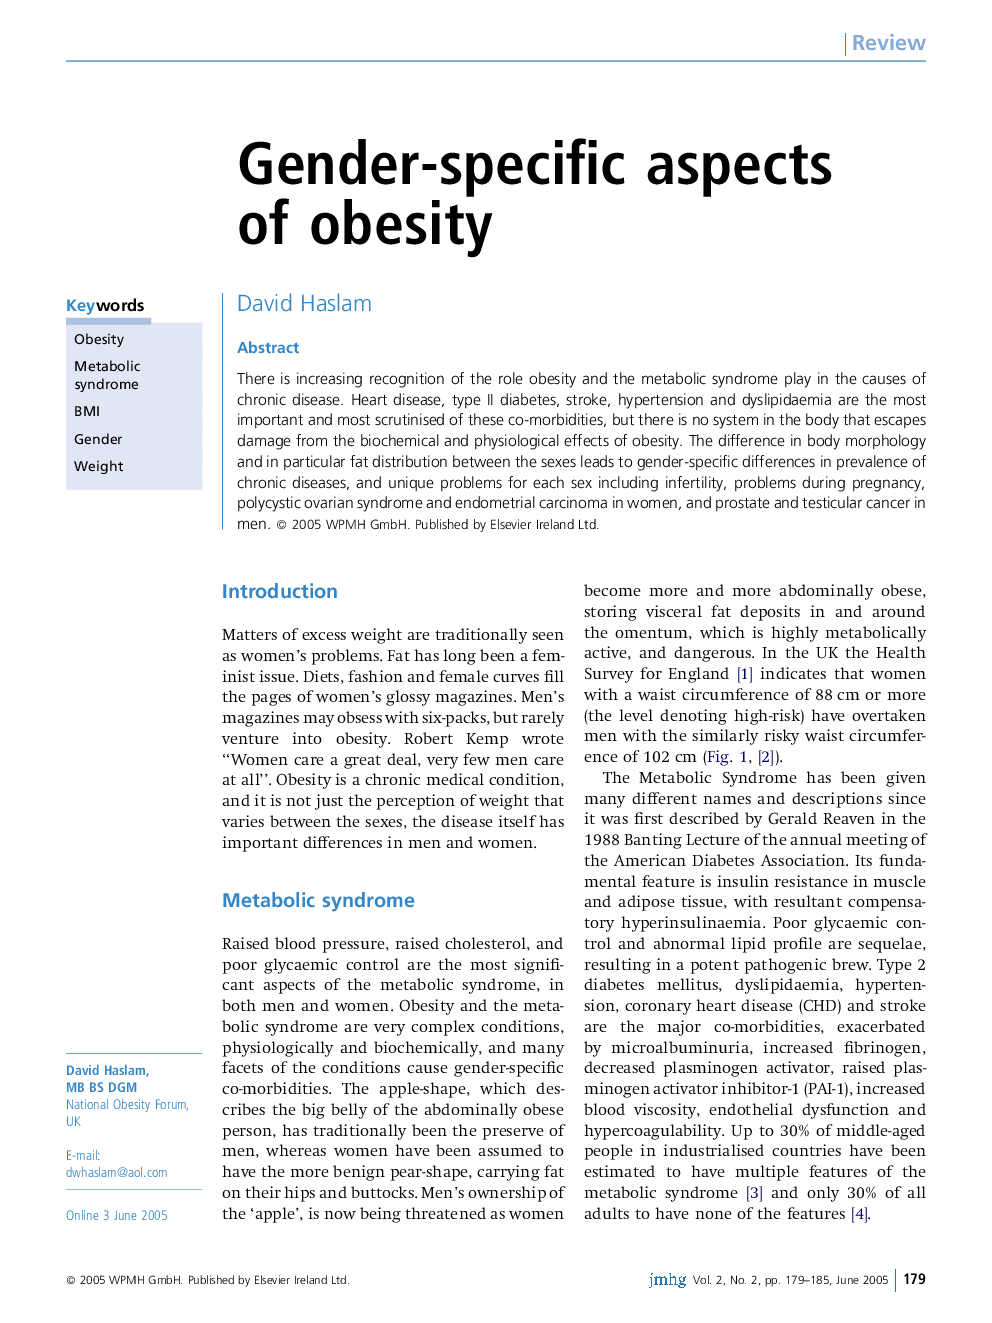 Gender-specific aspects of obesity